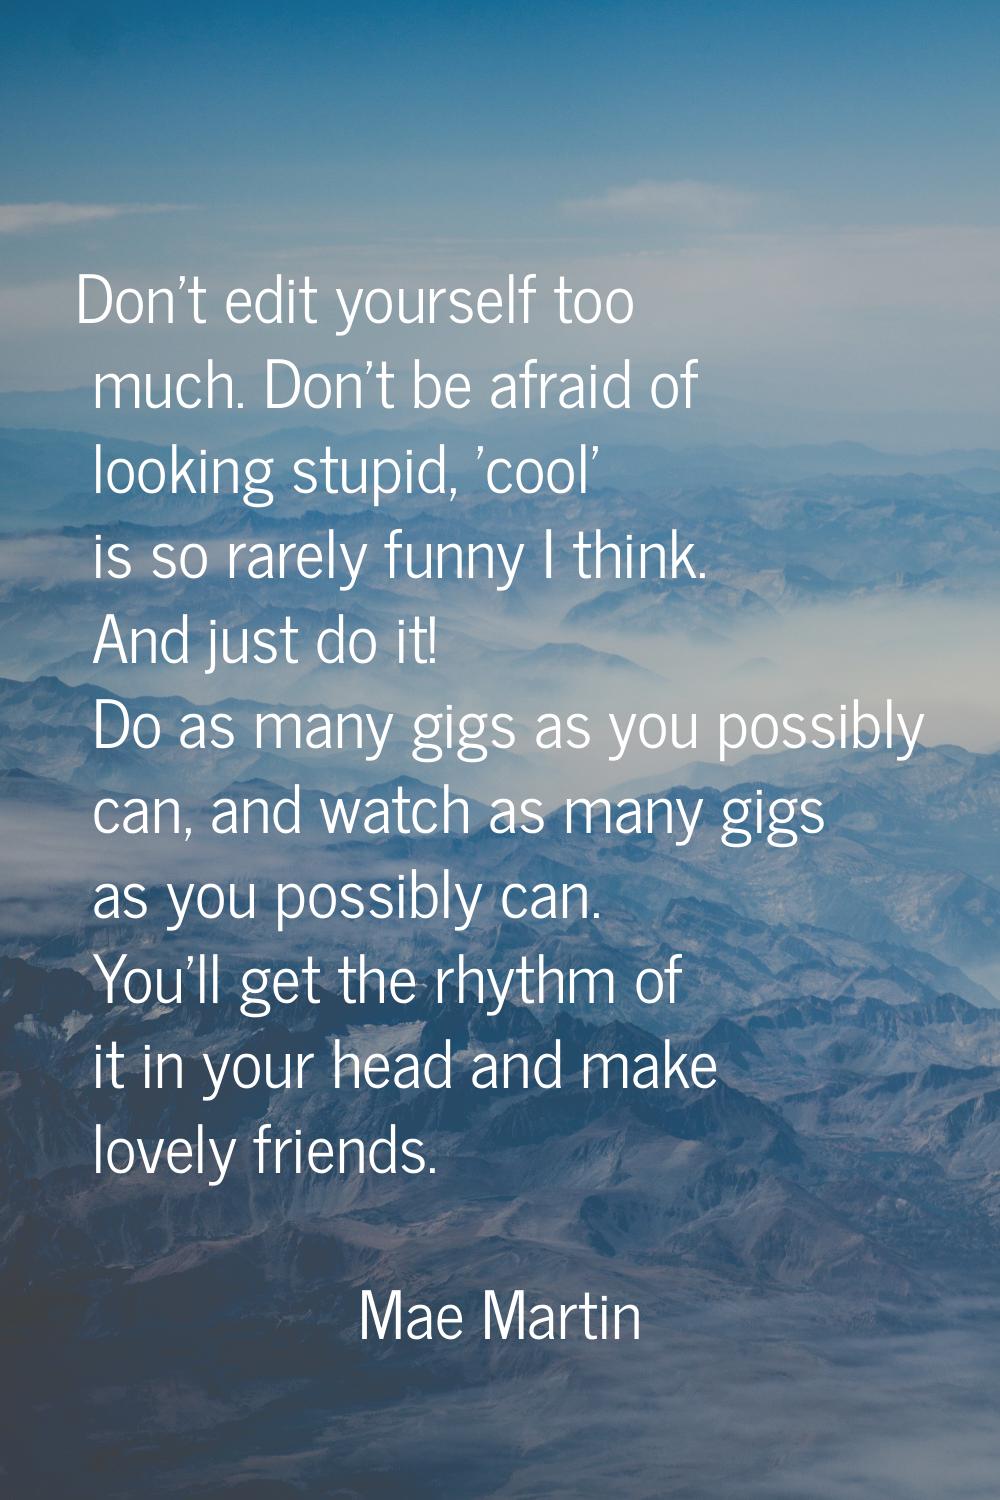 Don't edit yourself too much. Don't be afraid of looking stupid, 'cool' is so rarely funny I think.